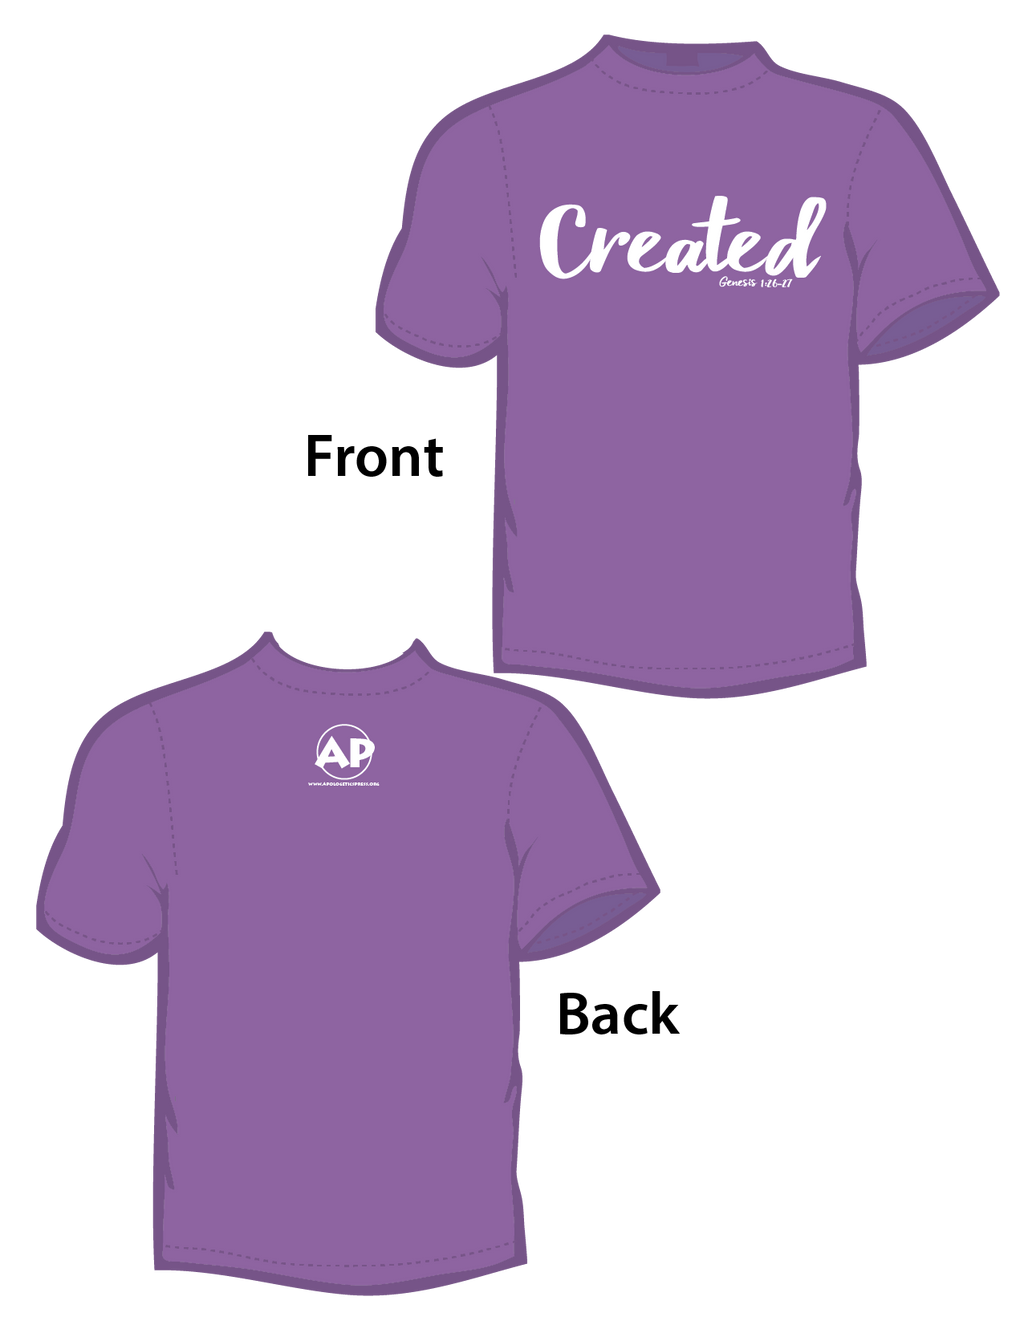 Created (T-Shirt) Violet